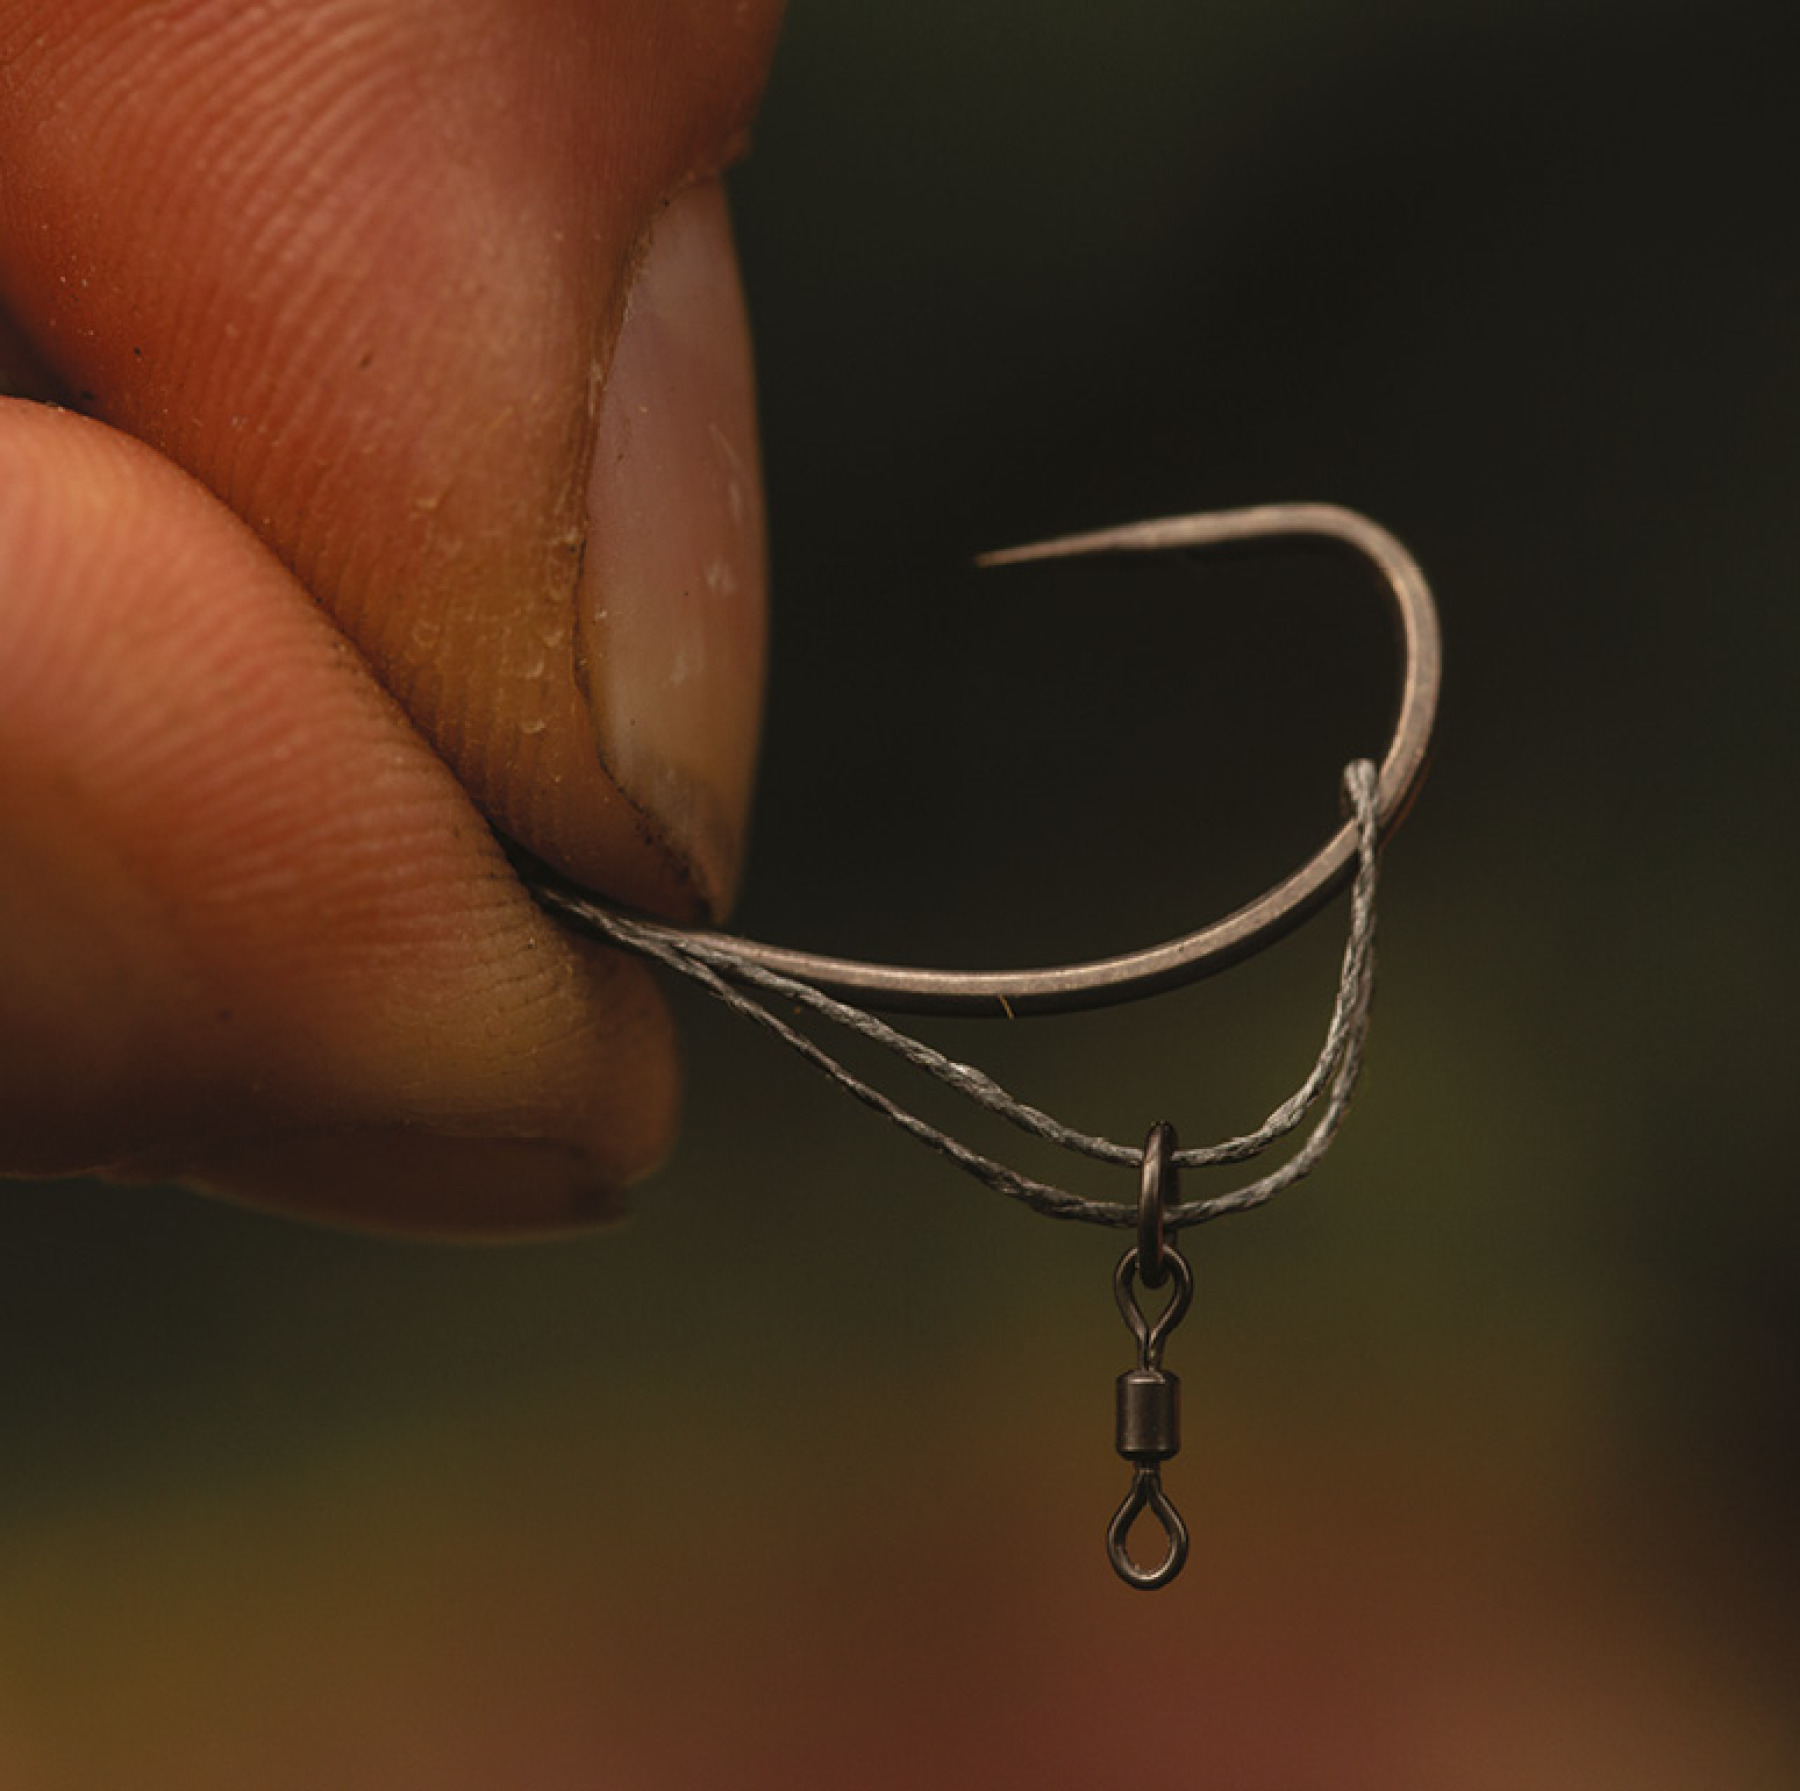 6. Add a hookbait swivel and pass the braid over the hook